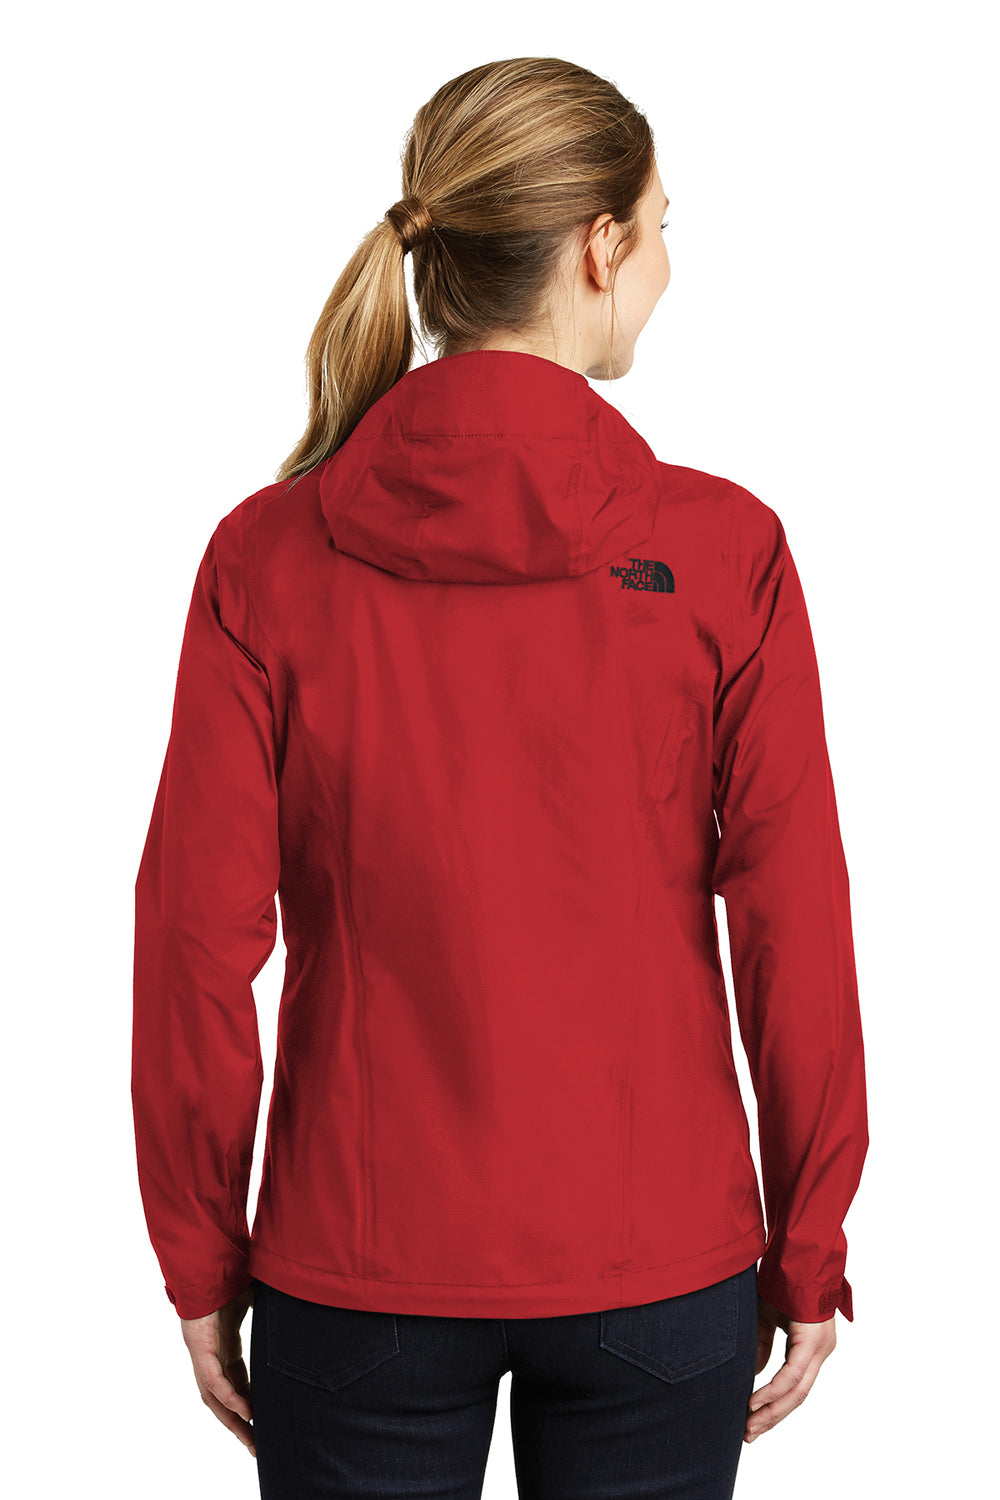 The North Face NF0A3LH5 Womens DryVent Waterproof Full Zip Hooded Jacket Rage Red Back